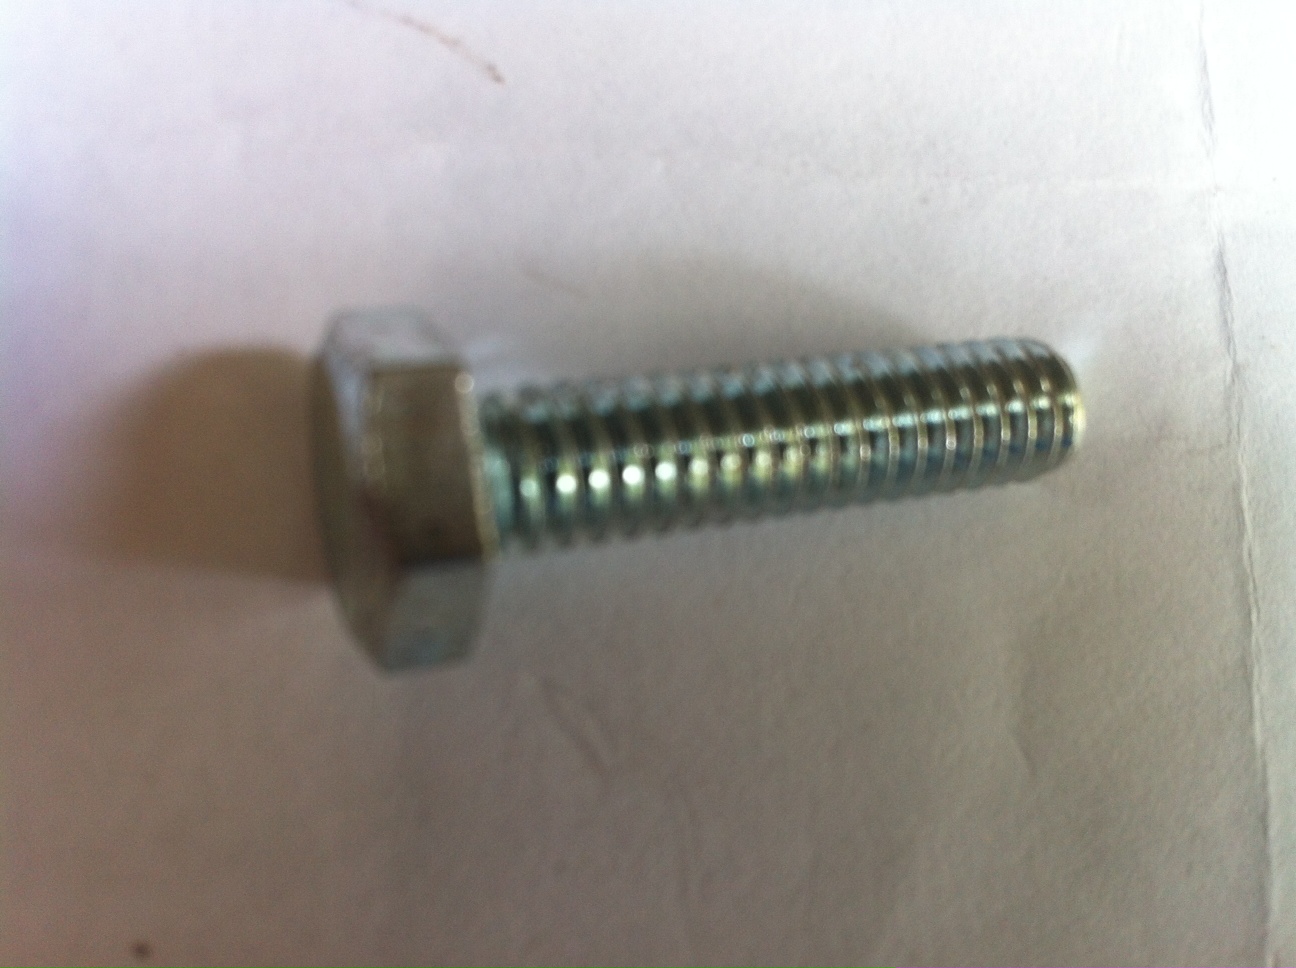 B1867/25 stainles set screw 5mm x 20mm pack of 25